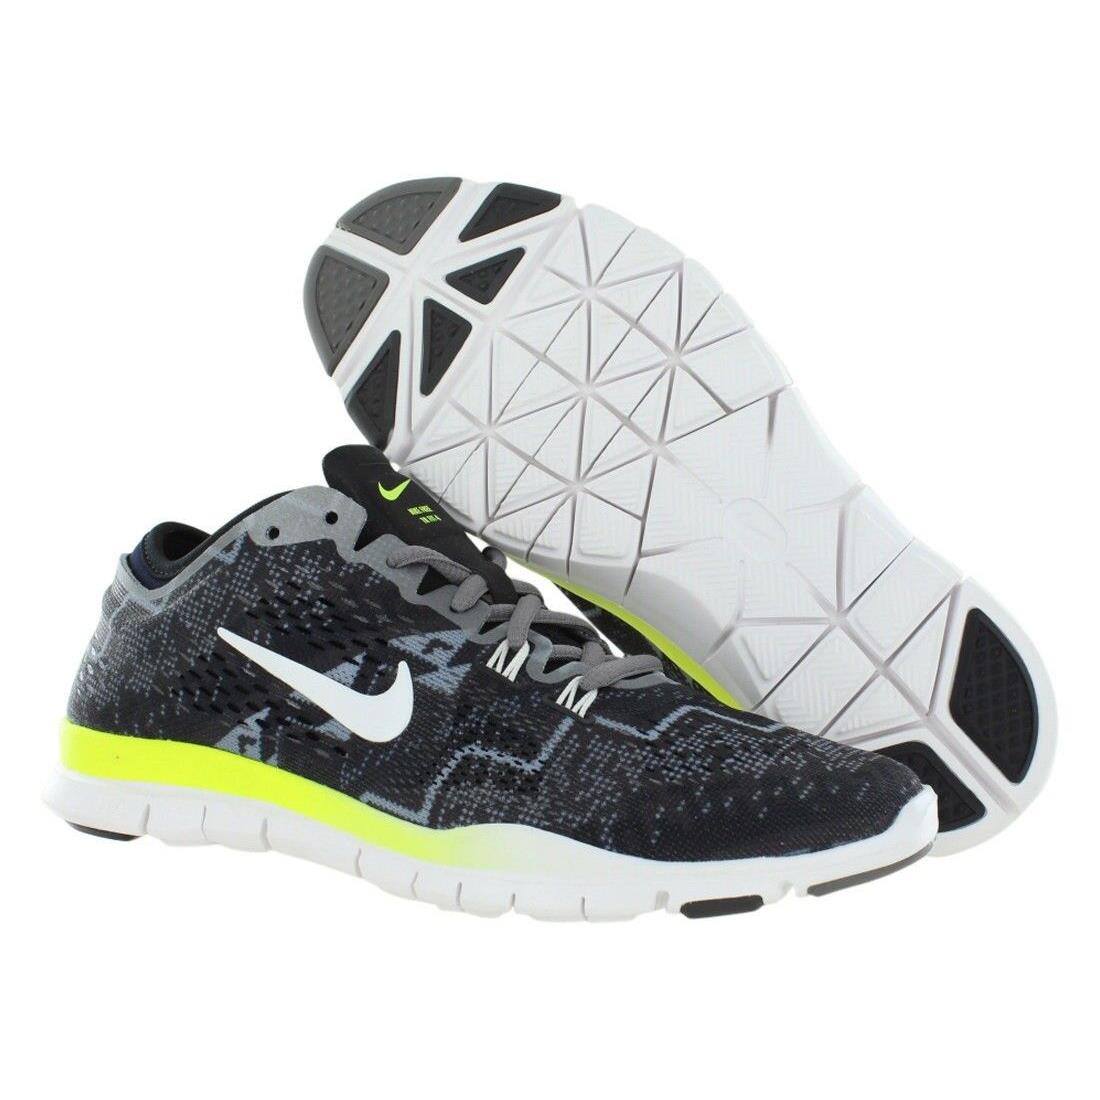 Nike Womens Free 5.0 TR Fit 5 Prt Running Trainers 704695 Sneakers Shoes US 6